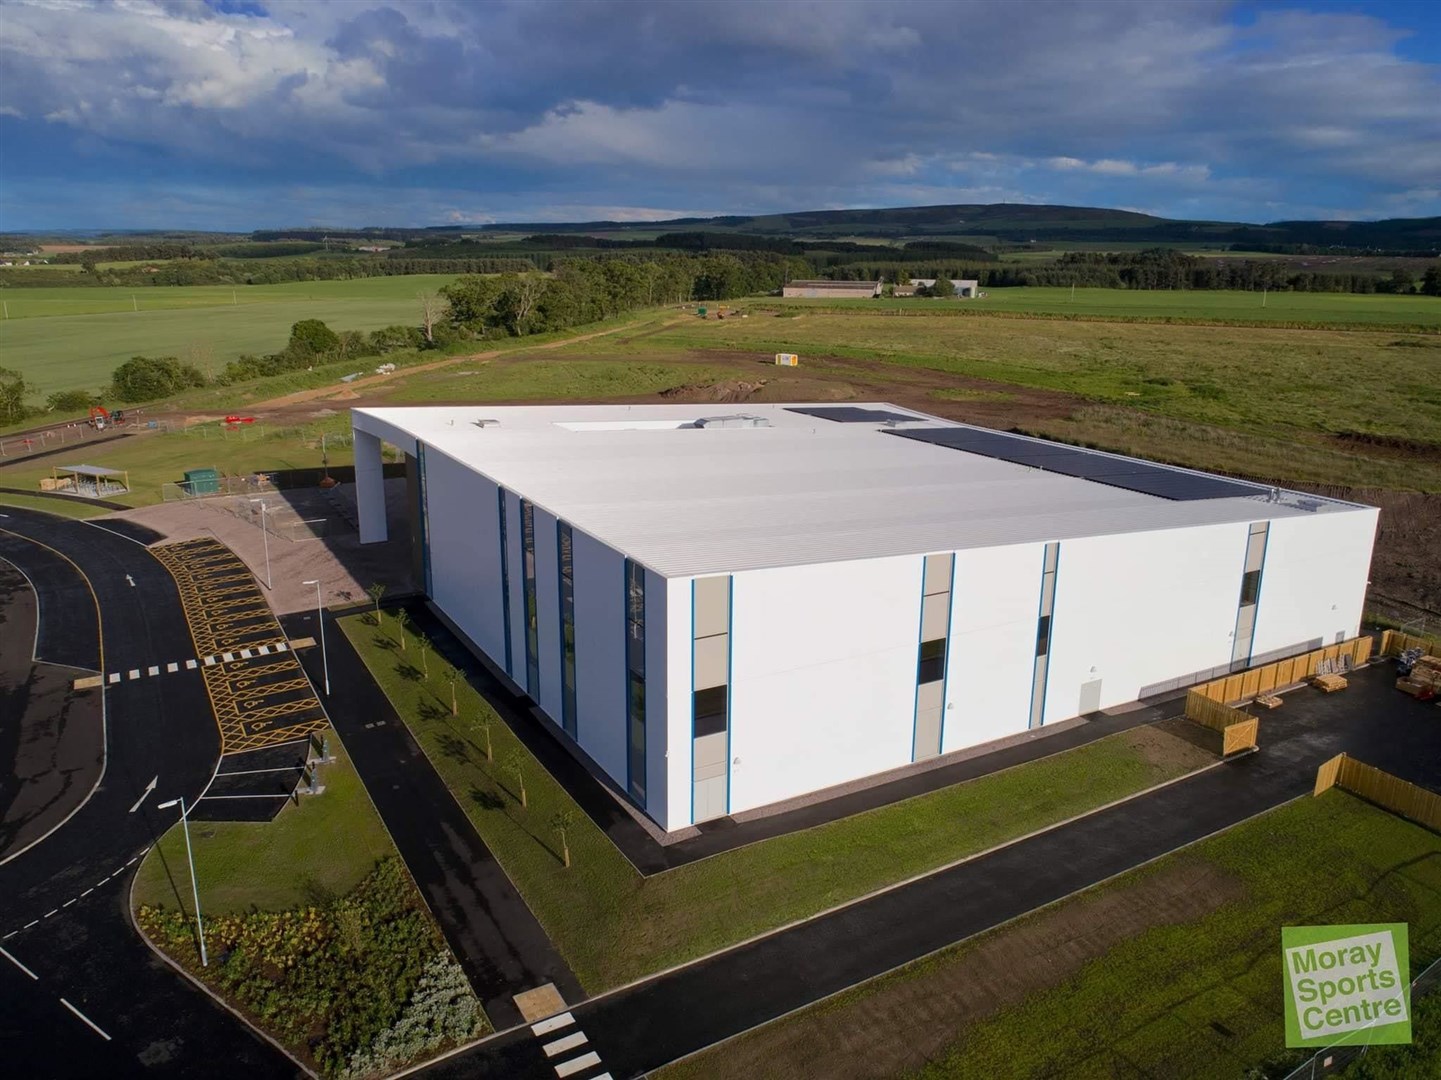 The brand new Moray Sports Centre, which opened it's doors this week